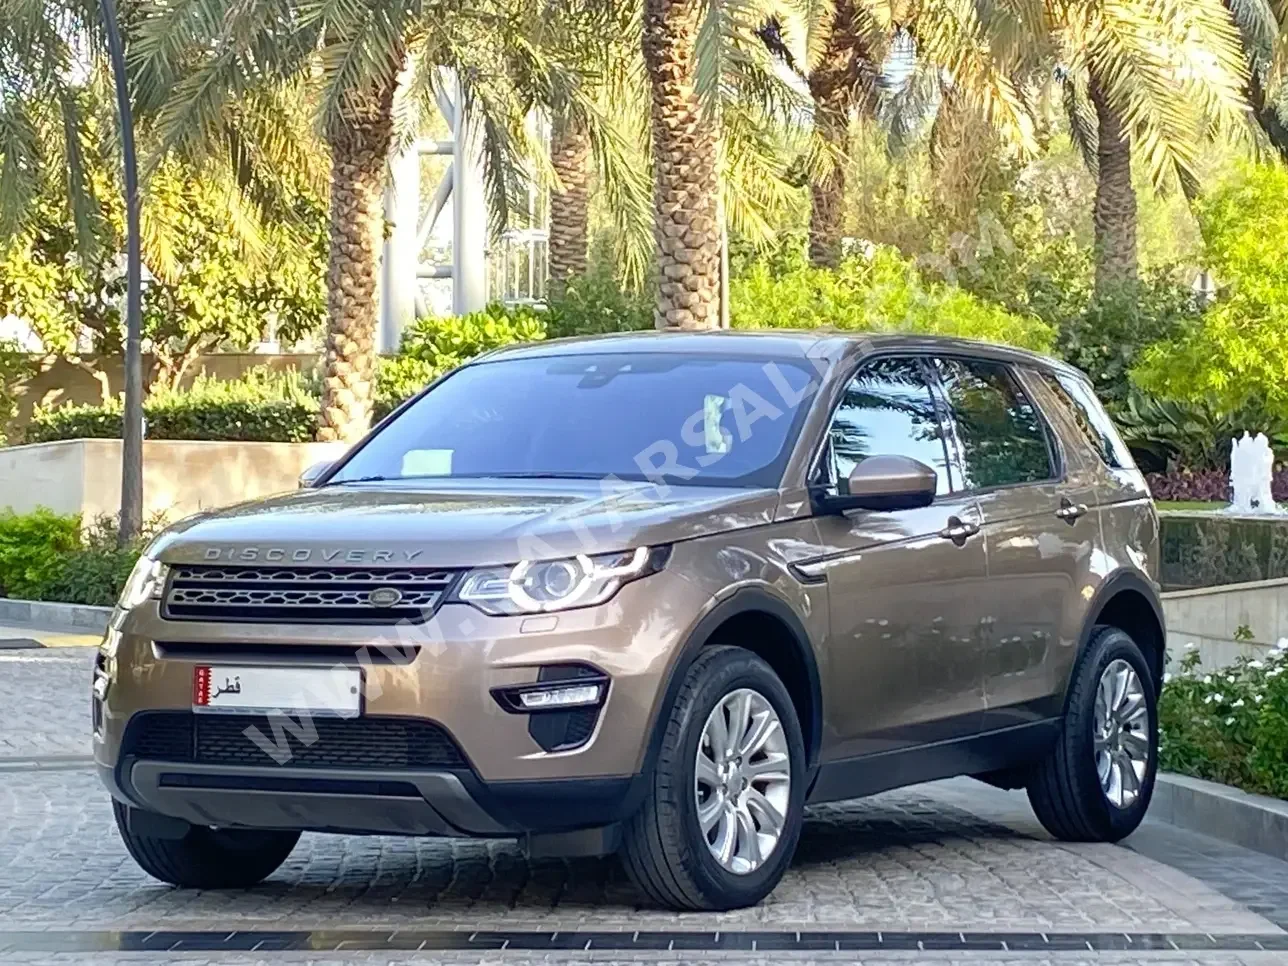 Land Rover  Discovery  Sport  2017  Automatic  76,000 Km  4 Cylinder  All Wheel Drive (AWD)  SUV  Brown